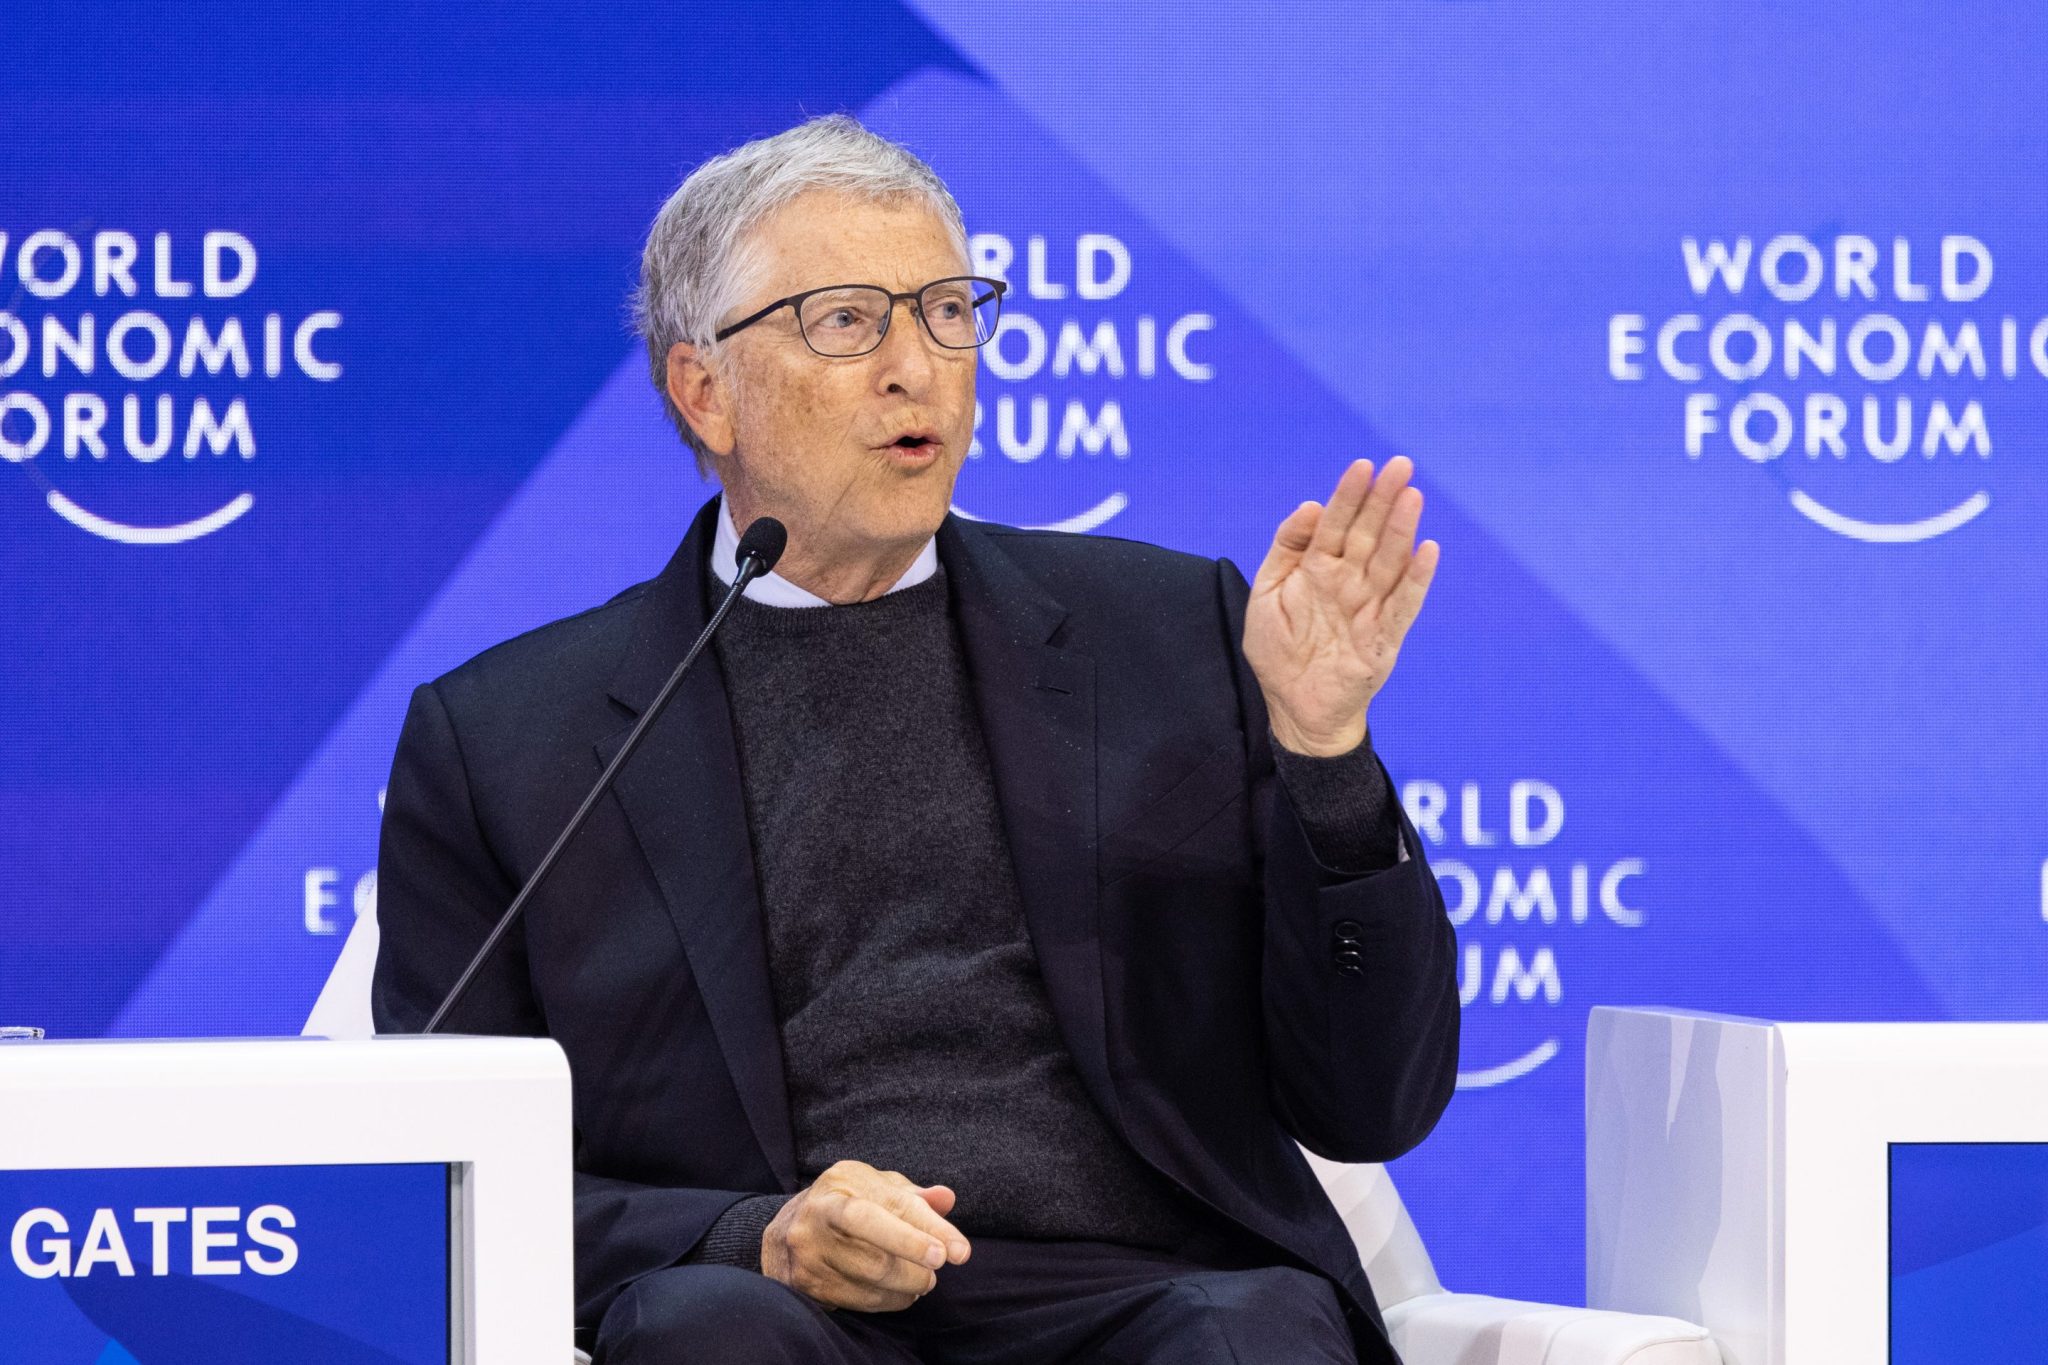 Bill Gates foundation chief takes a shot at donors who give only to elite universities, urging them to follow Chuck Feeney’s example